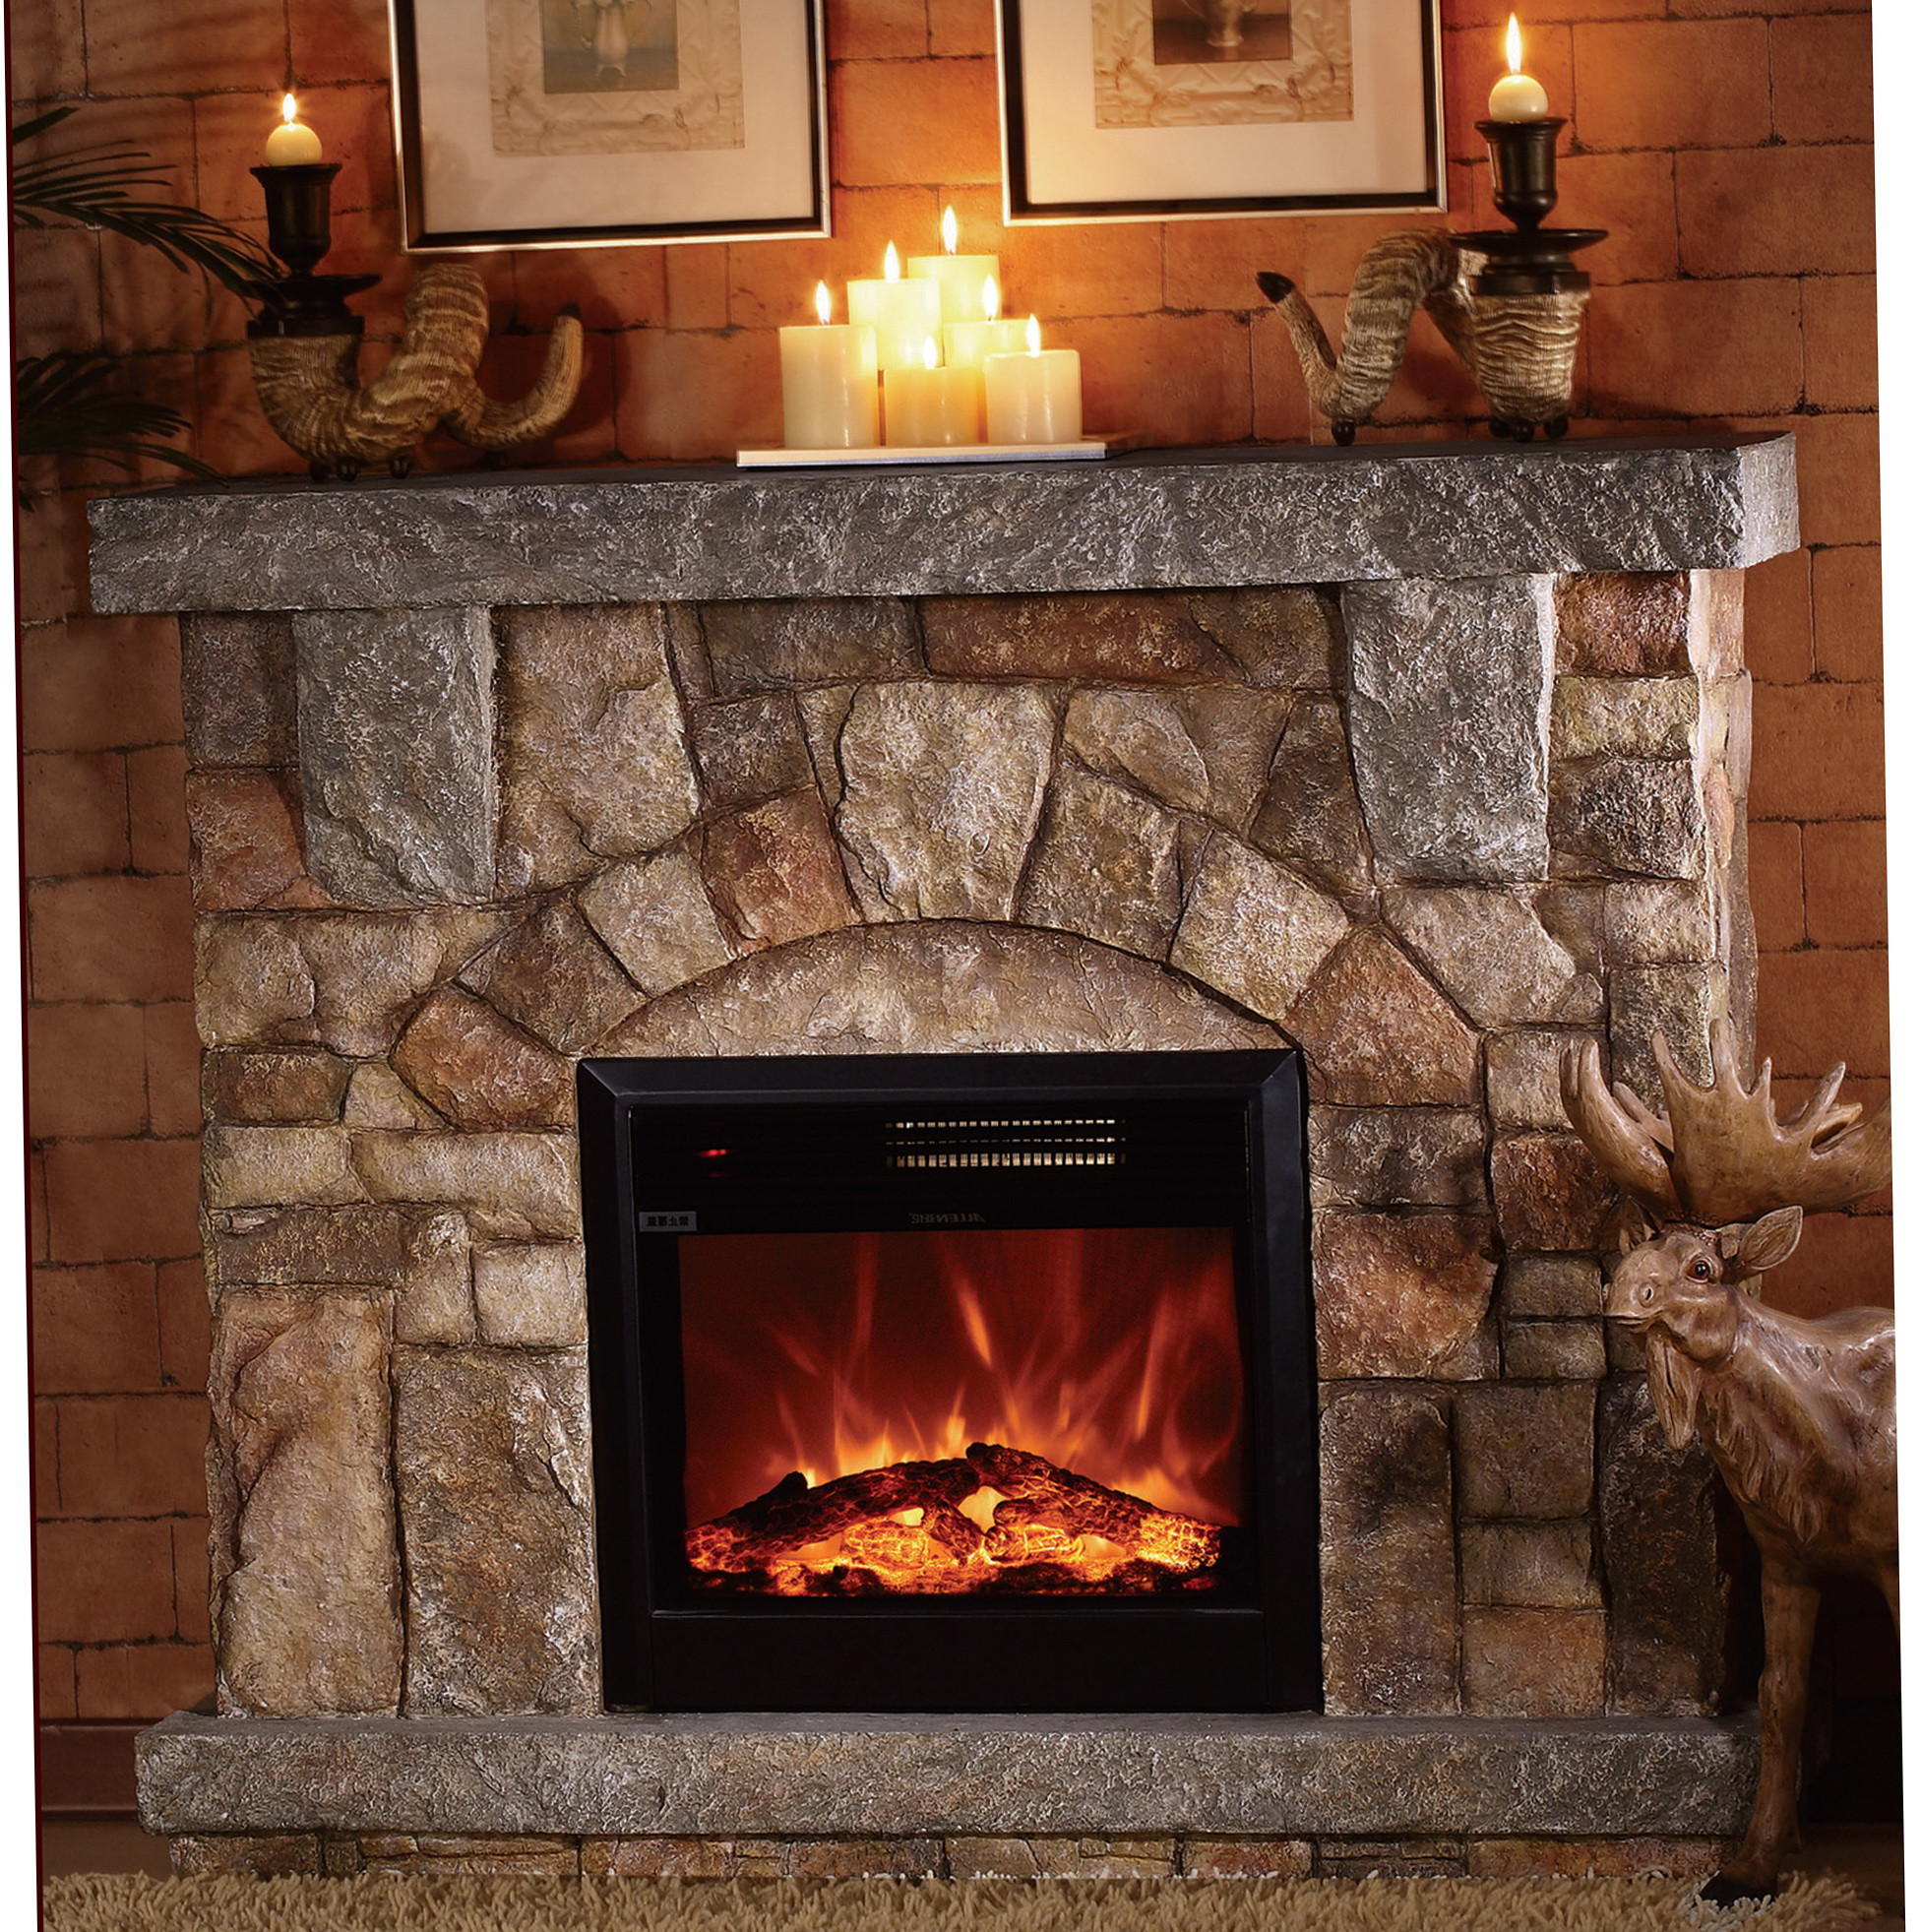 Decorative Electric Fireplace
 Stone Electric Fireplace for Modern Rustic Home Designs